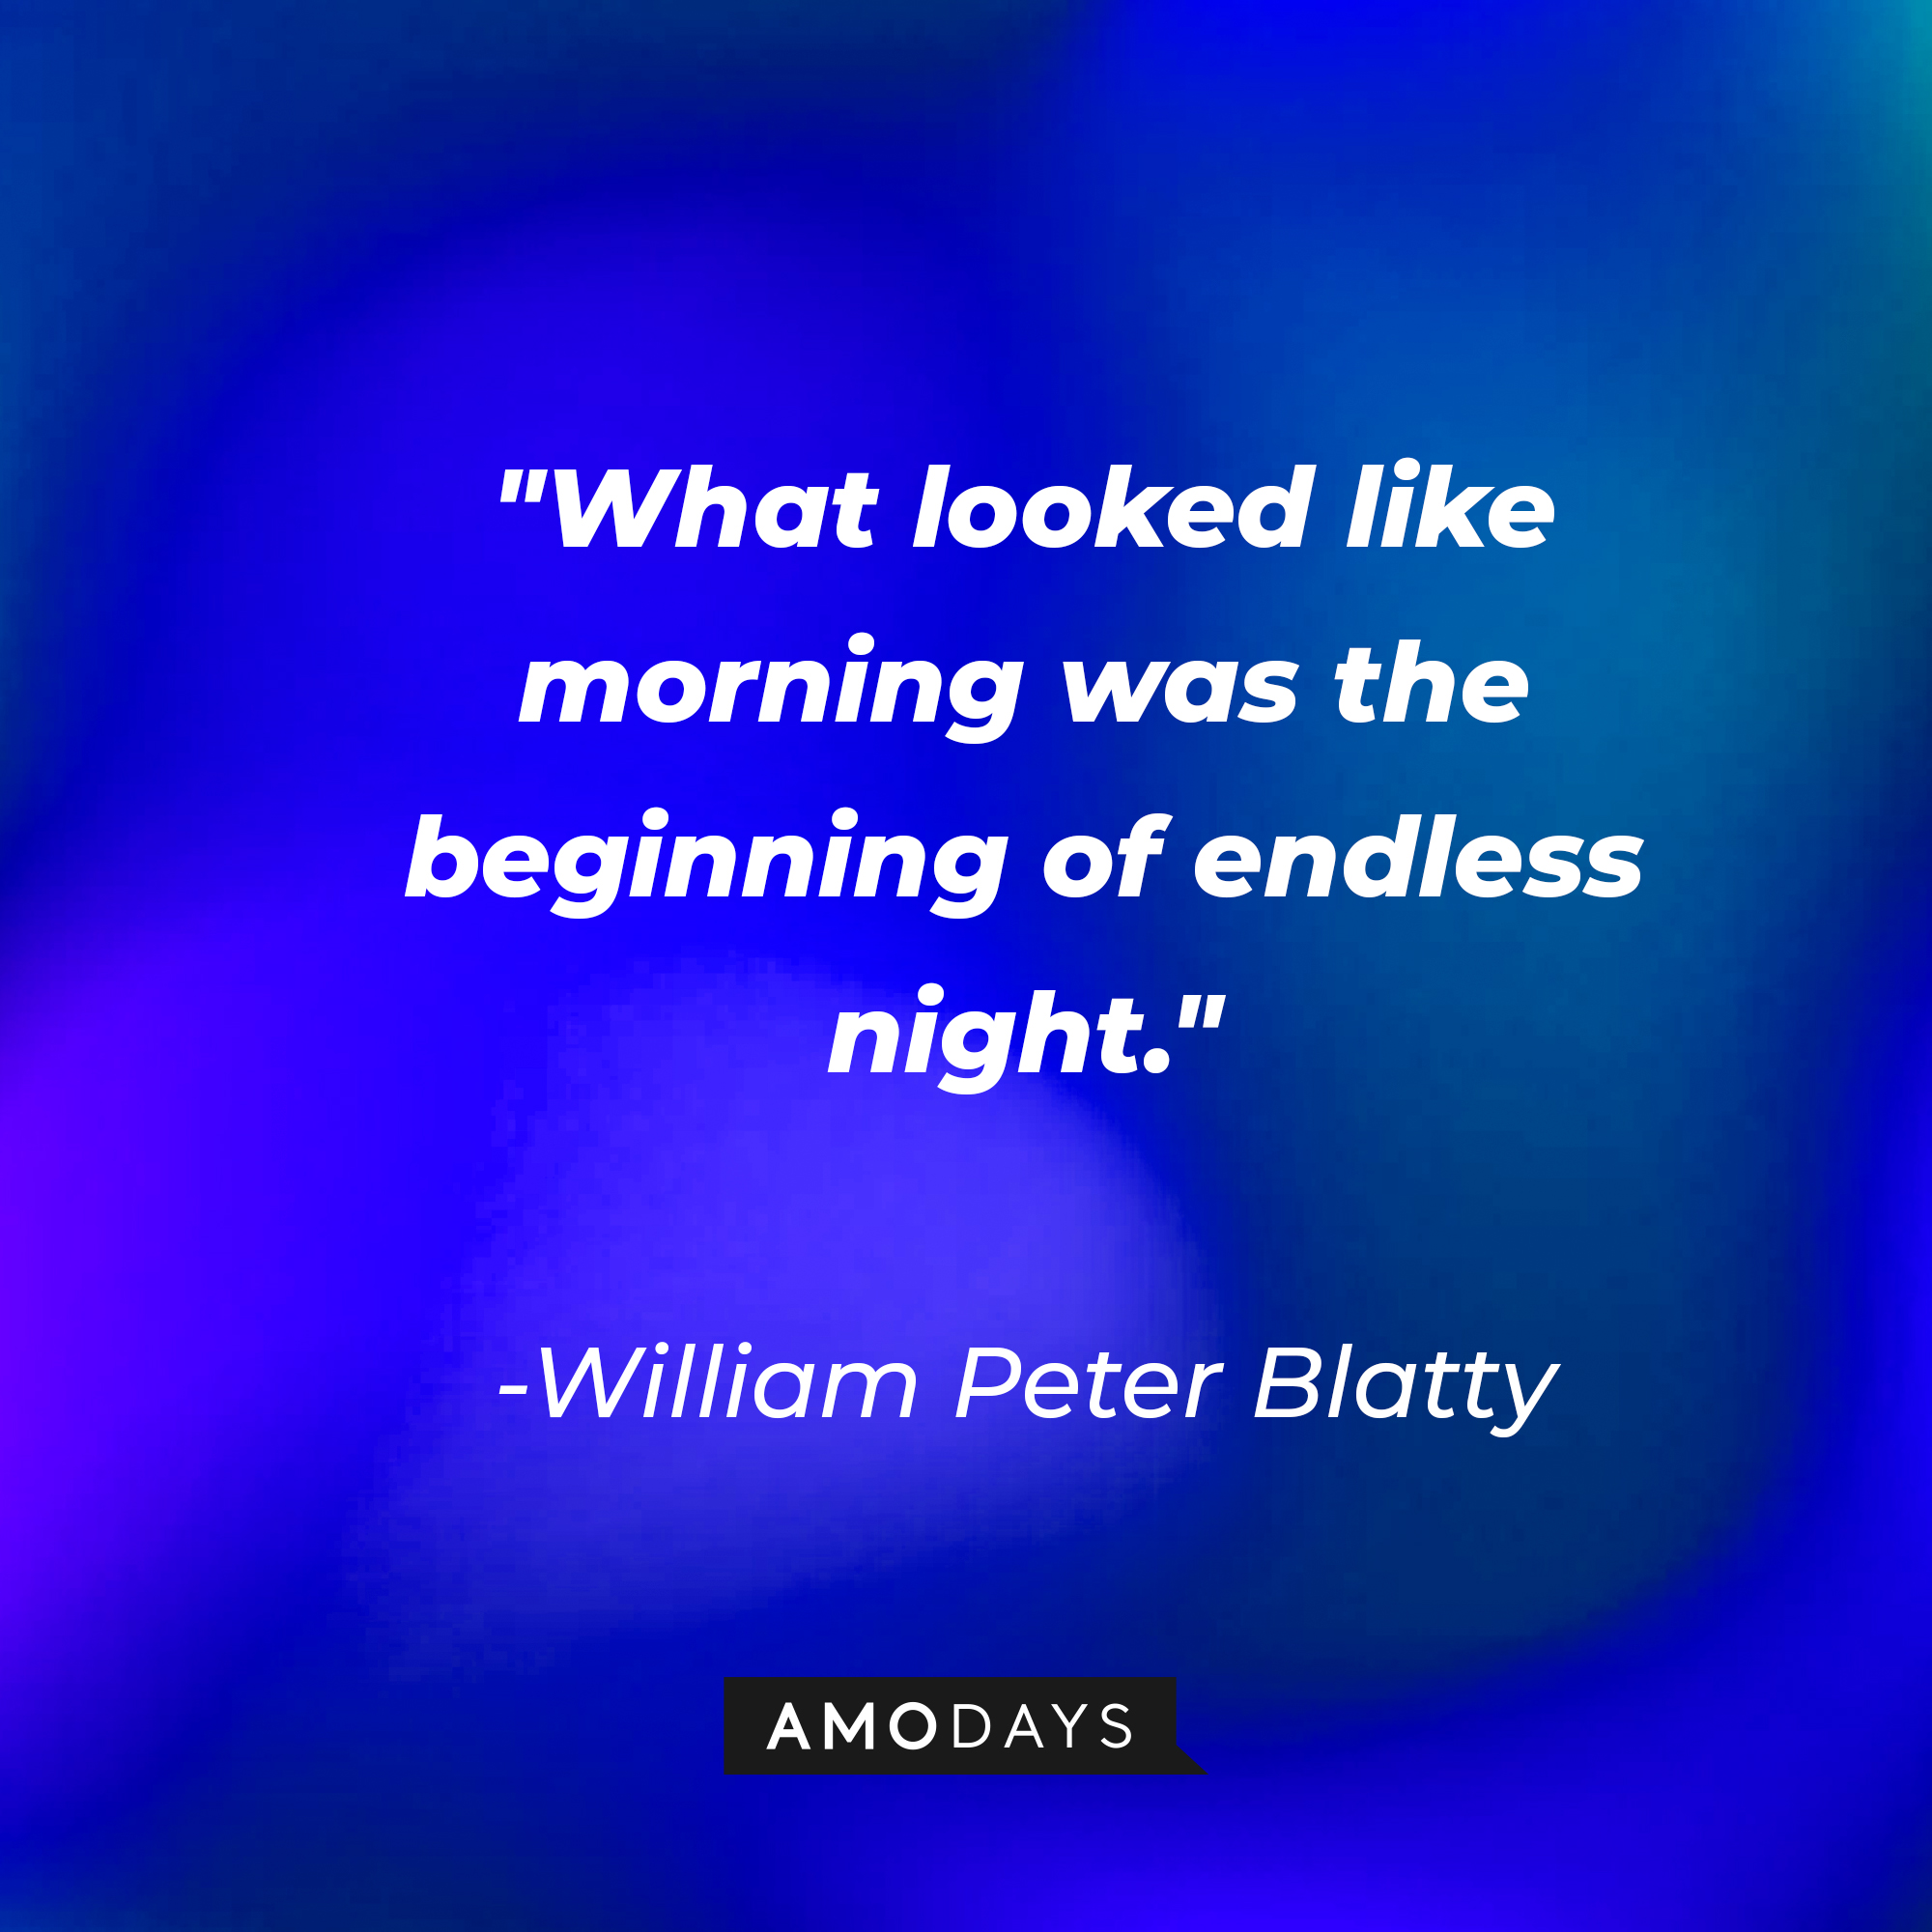 William Peter Blatty's quote: "What looked like morning was the beginning of endless night." | Source: AmoDays